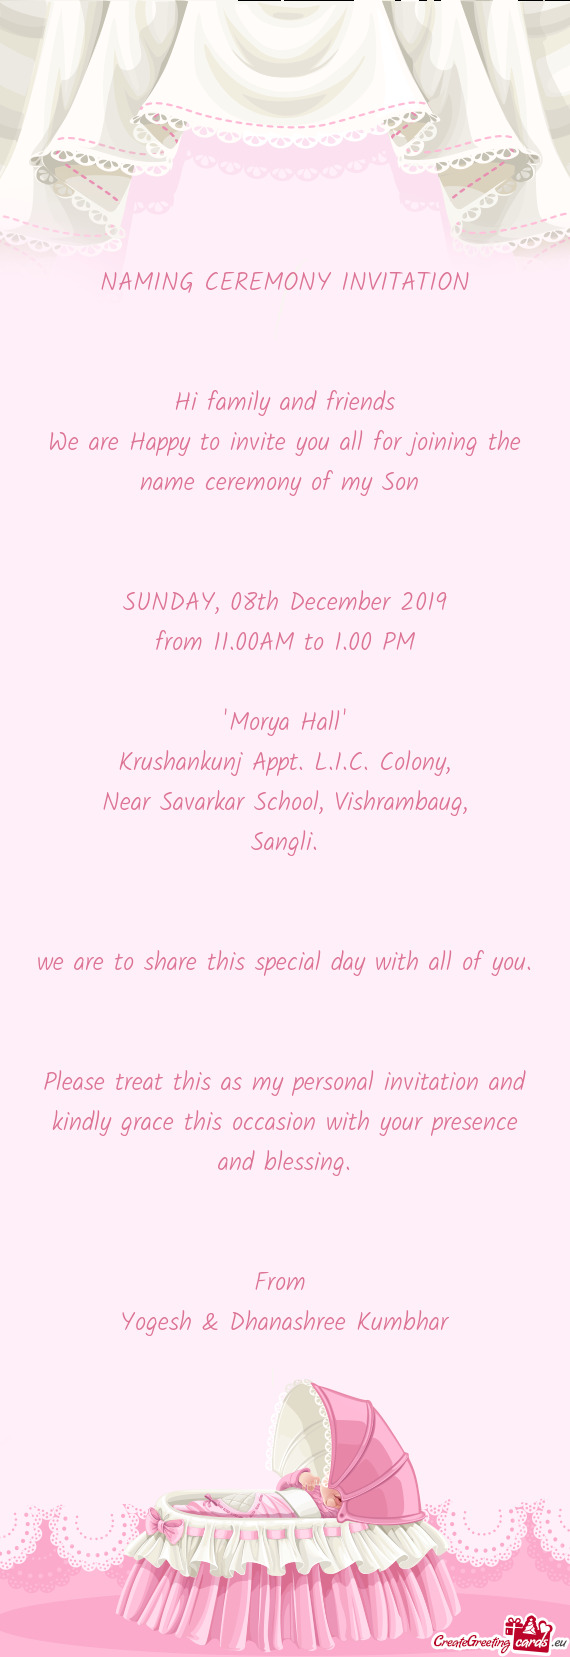 We are Happy to invite you all for joining the name ceremony of my Son